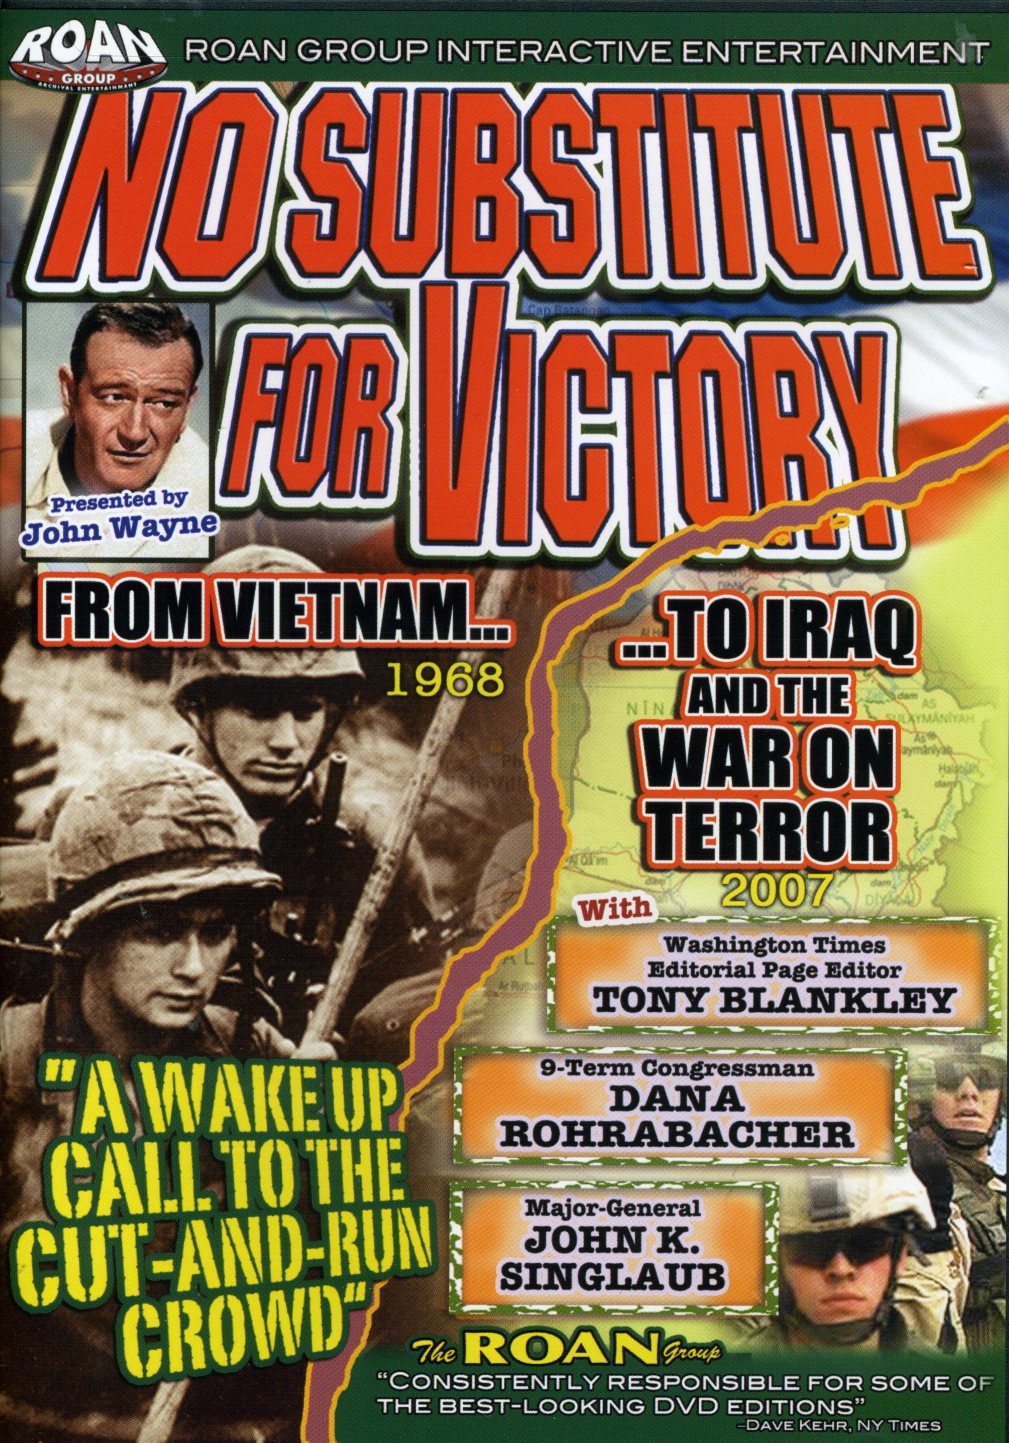 NO SUBSTITUTE FOR VICTORY: FROM VIETNAM TO IRAQ